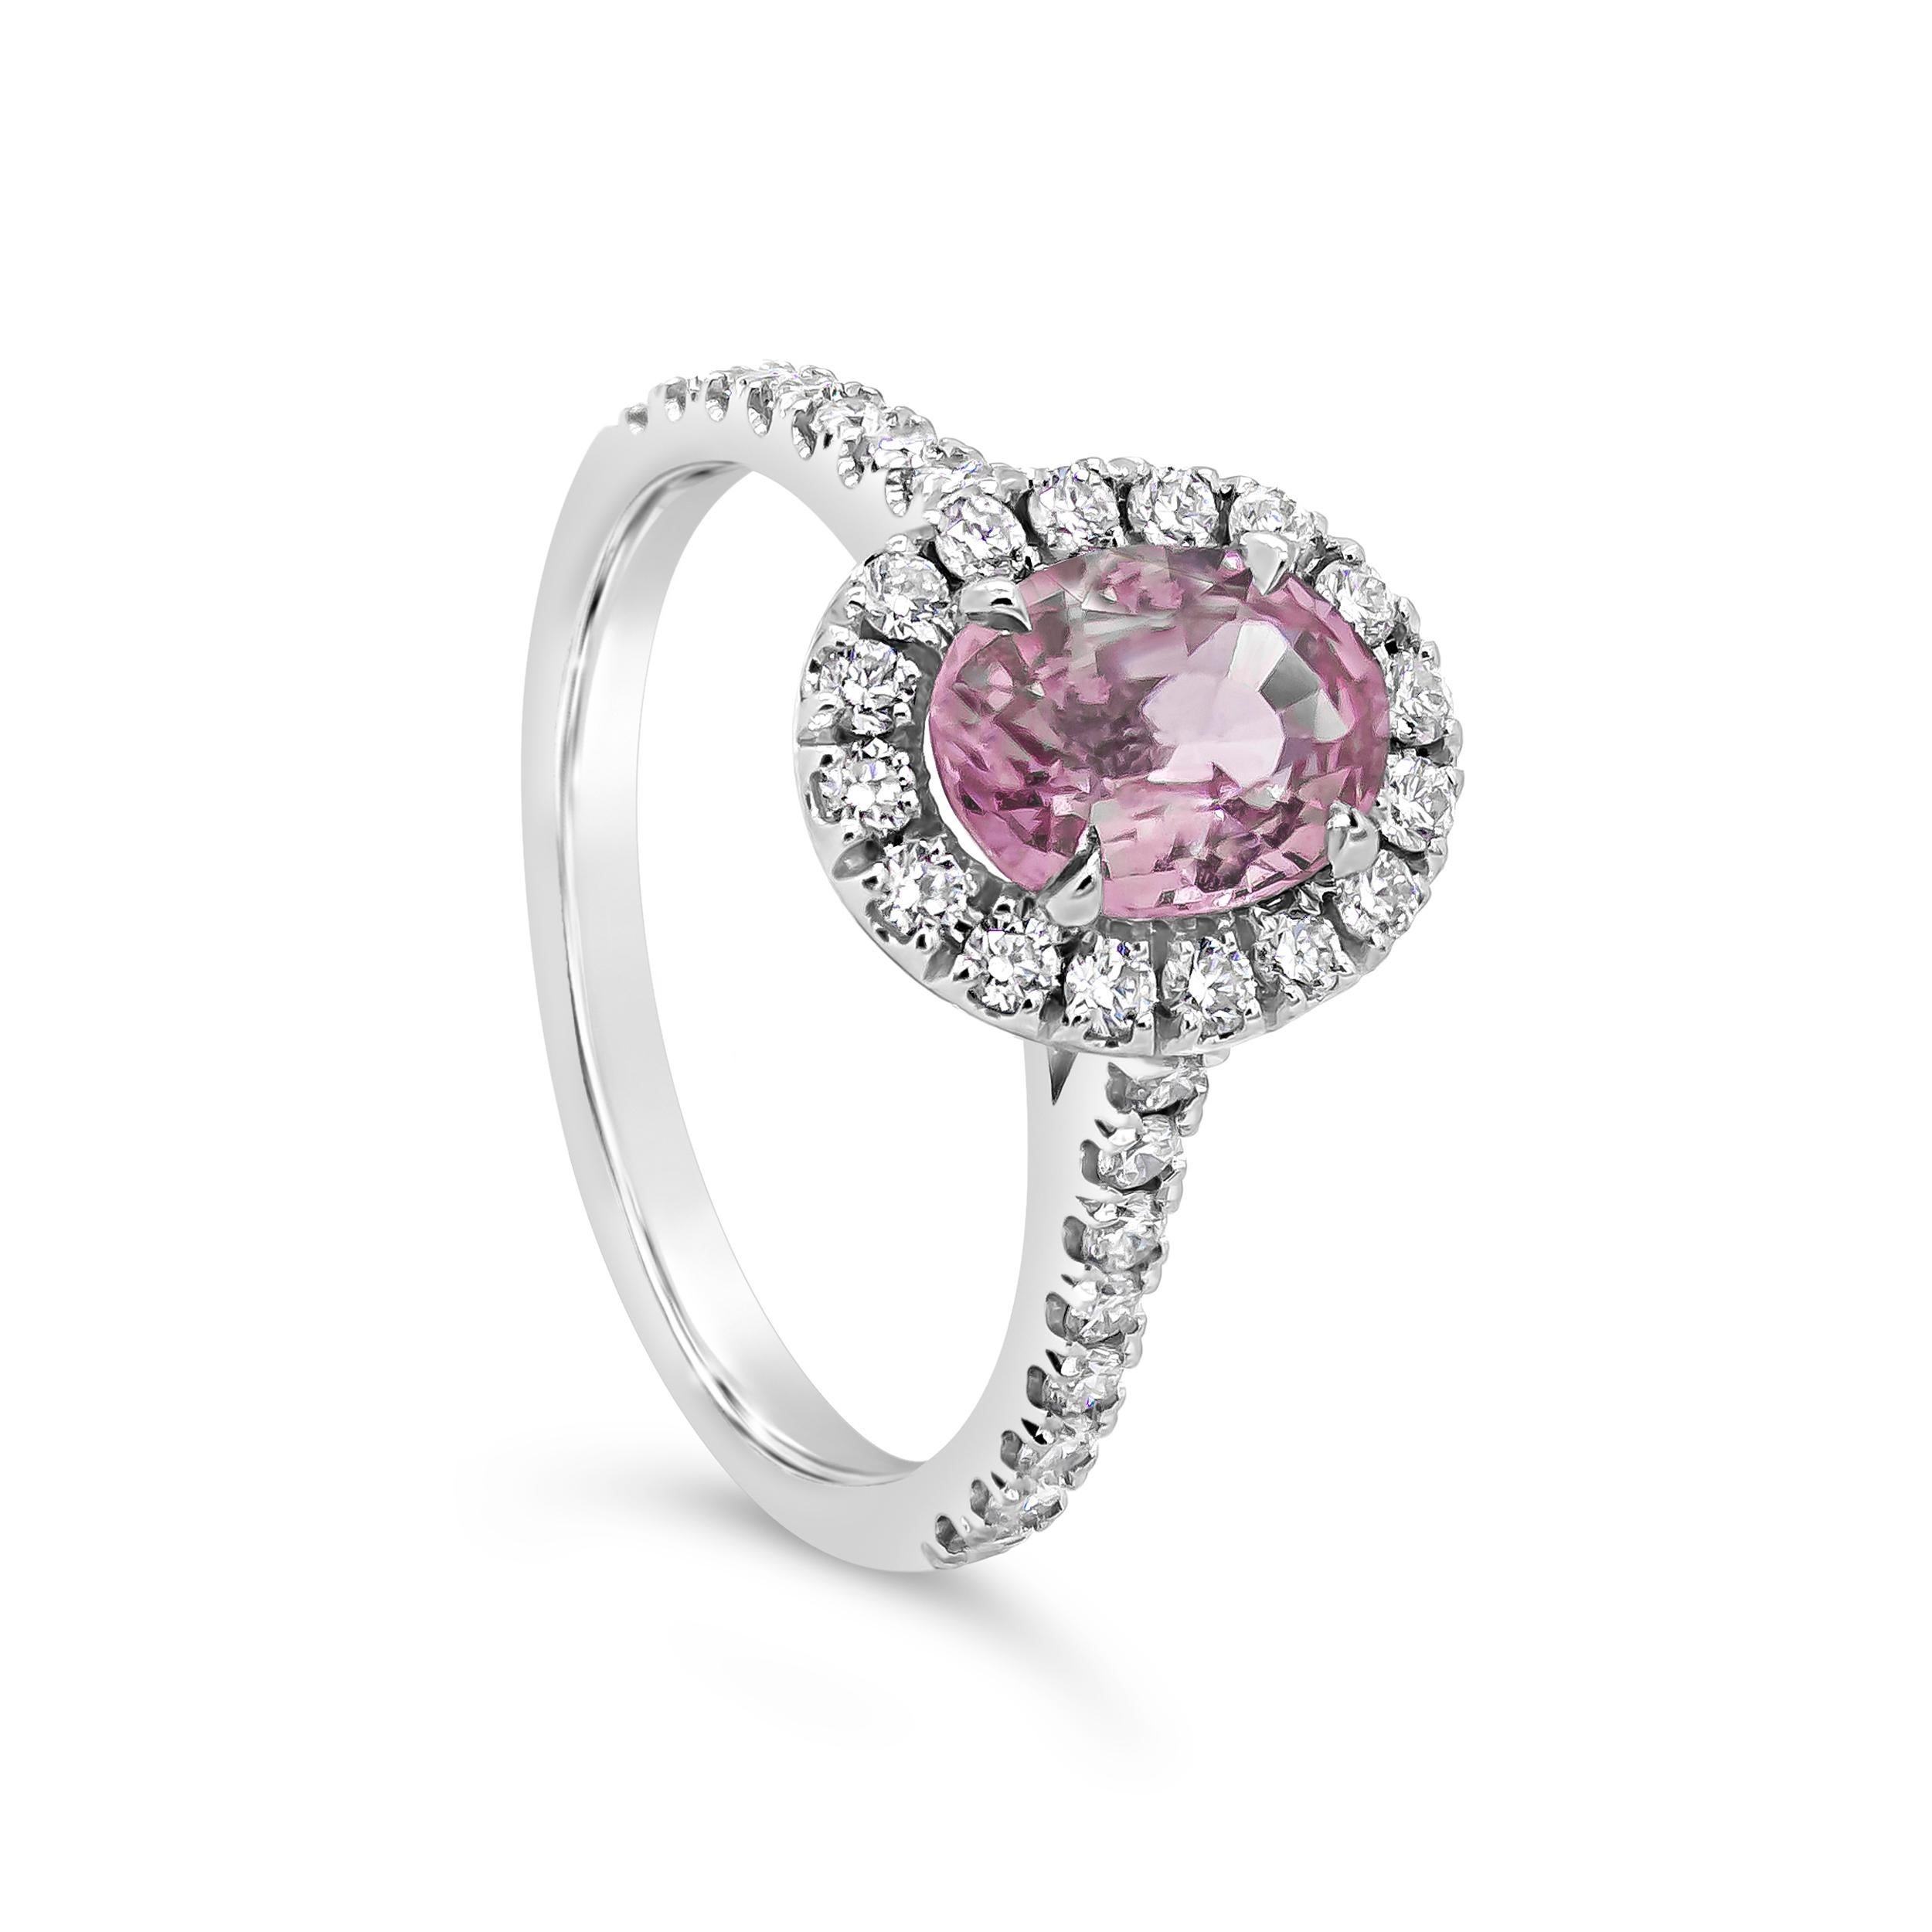 An appealing halo engagement ring style showcasing a oval cut pink sapphire weighing 1.57 carats total, elegantly surrounded by a row of brilliant round diamonds weighing 0.50 carats. Accented with a diamond encrusted wedding band set half way. Made